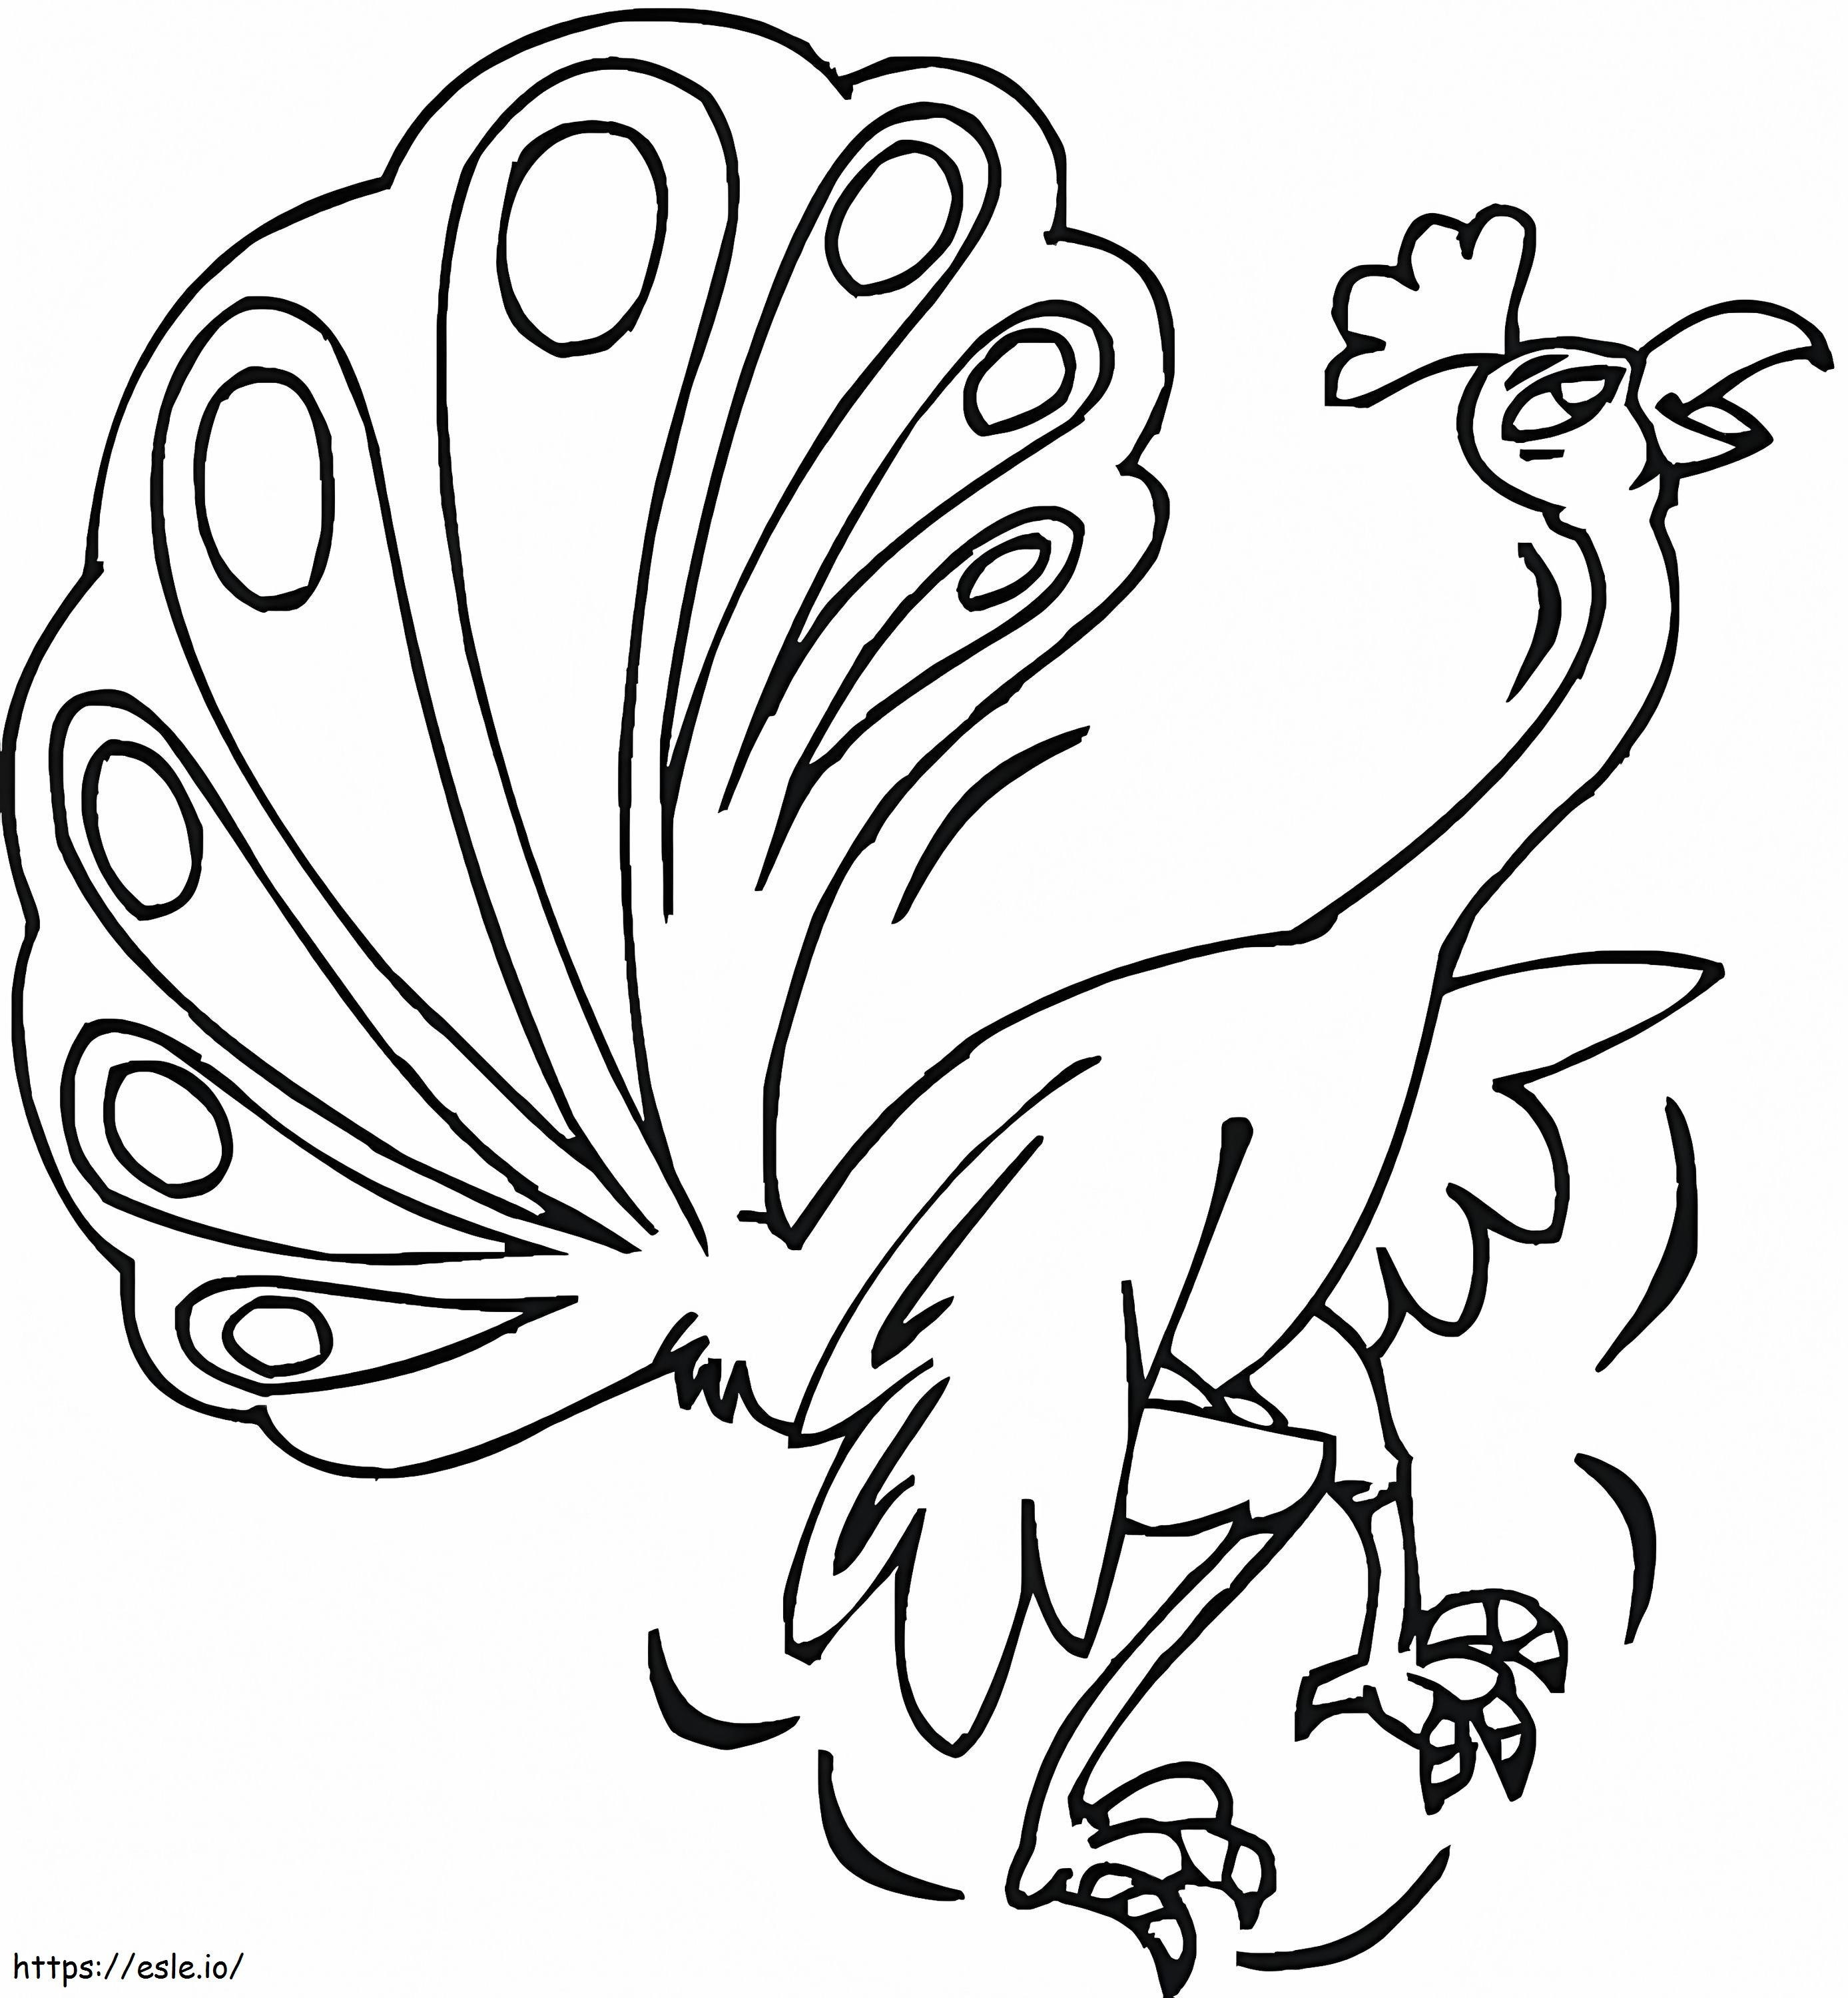 Crazy Peacock coloring page